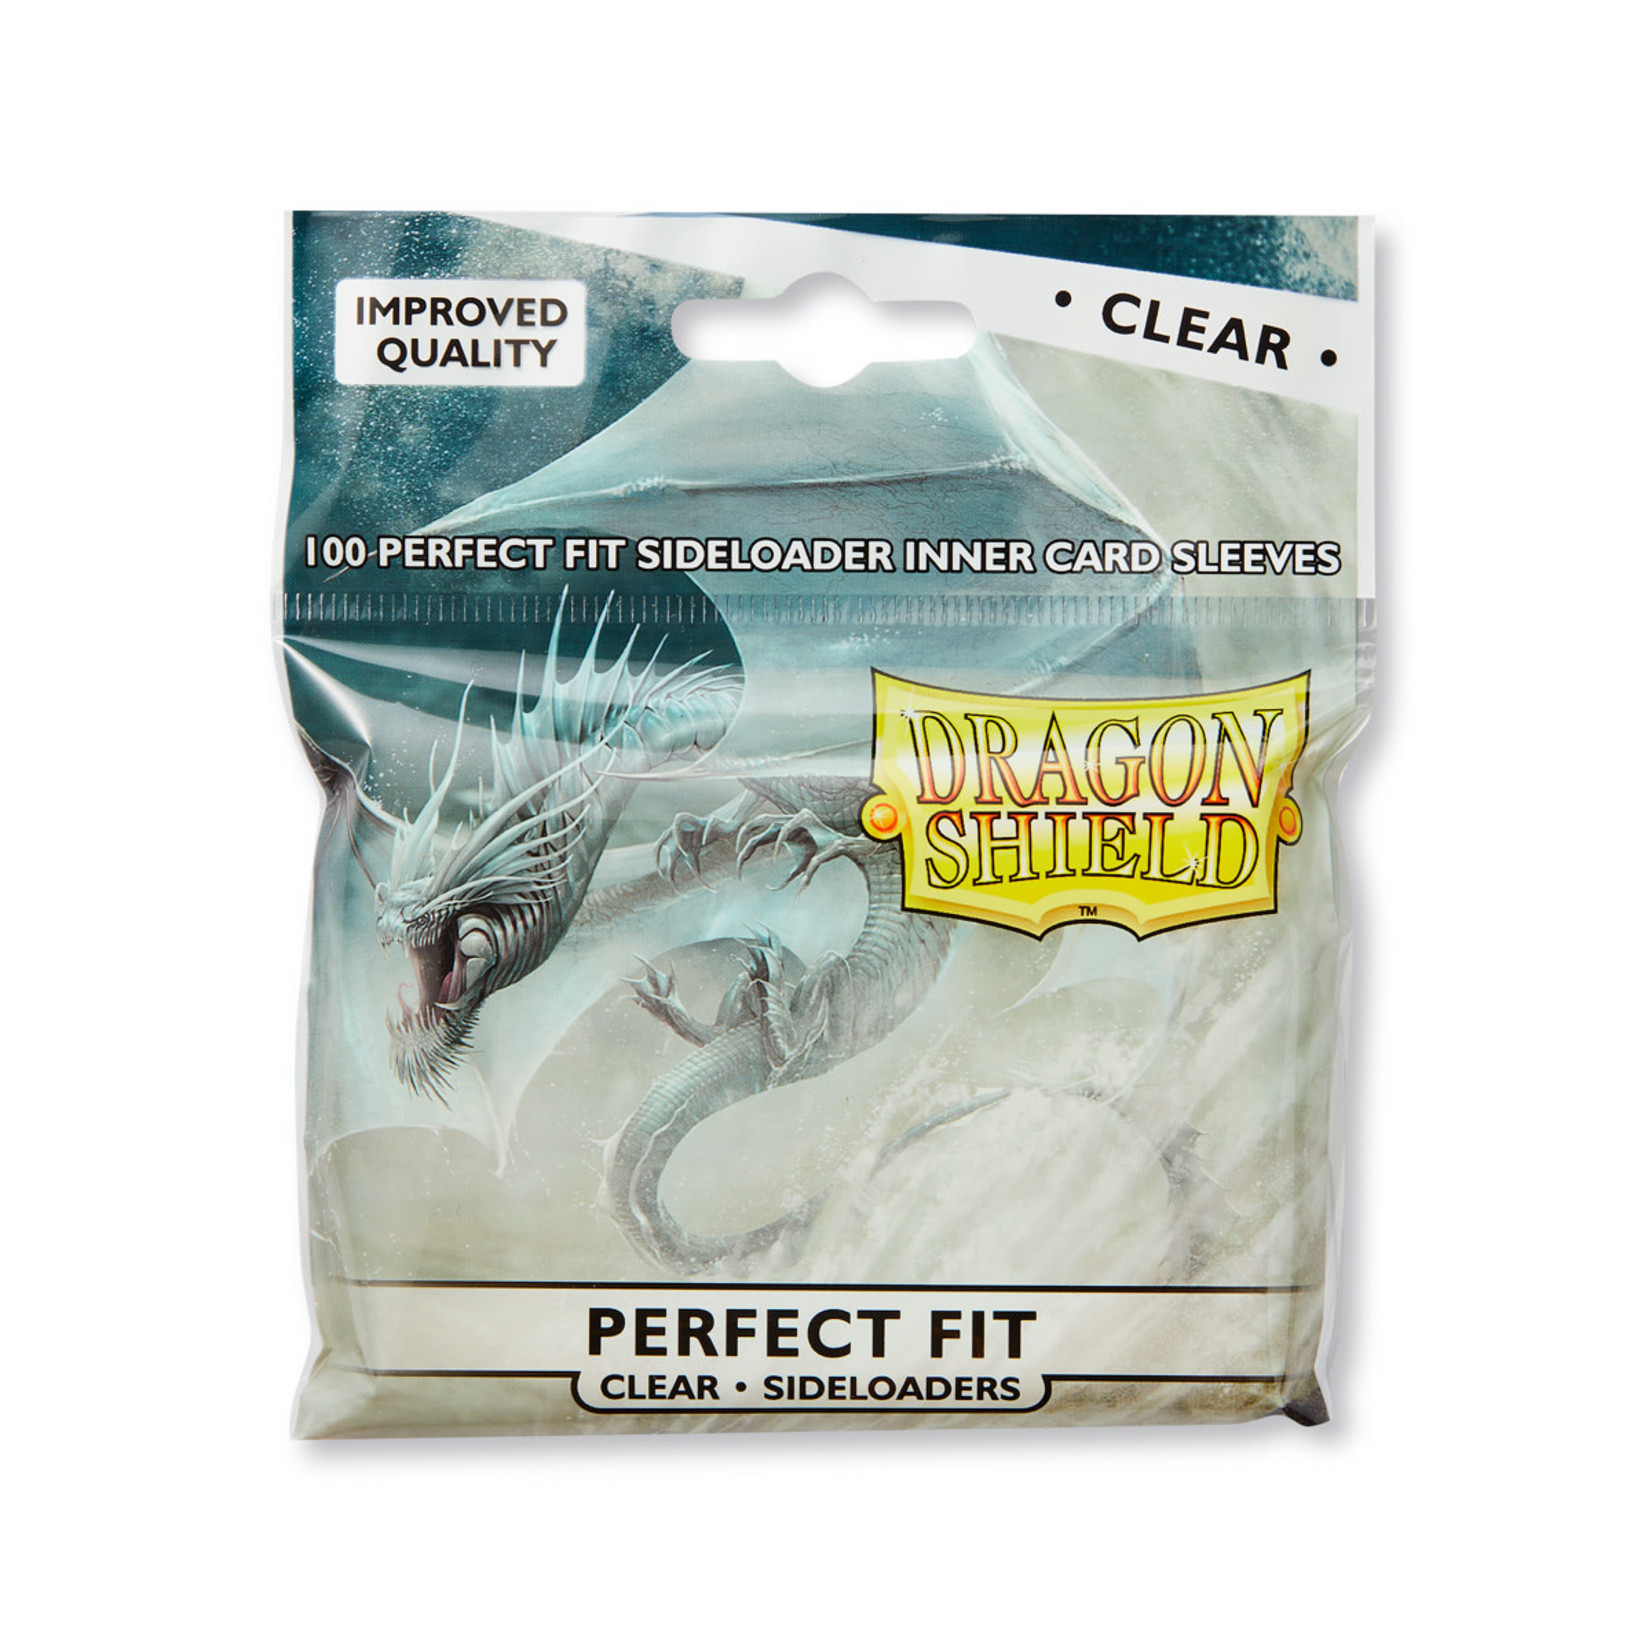 Dragon Shield Dragon Shield Sleeves: Perfect Fit Sideloaders- Clear (100 ct. In bag)